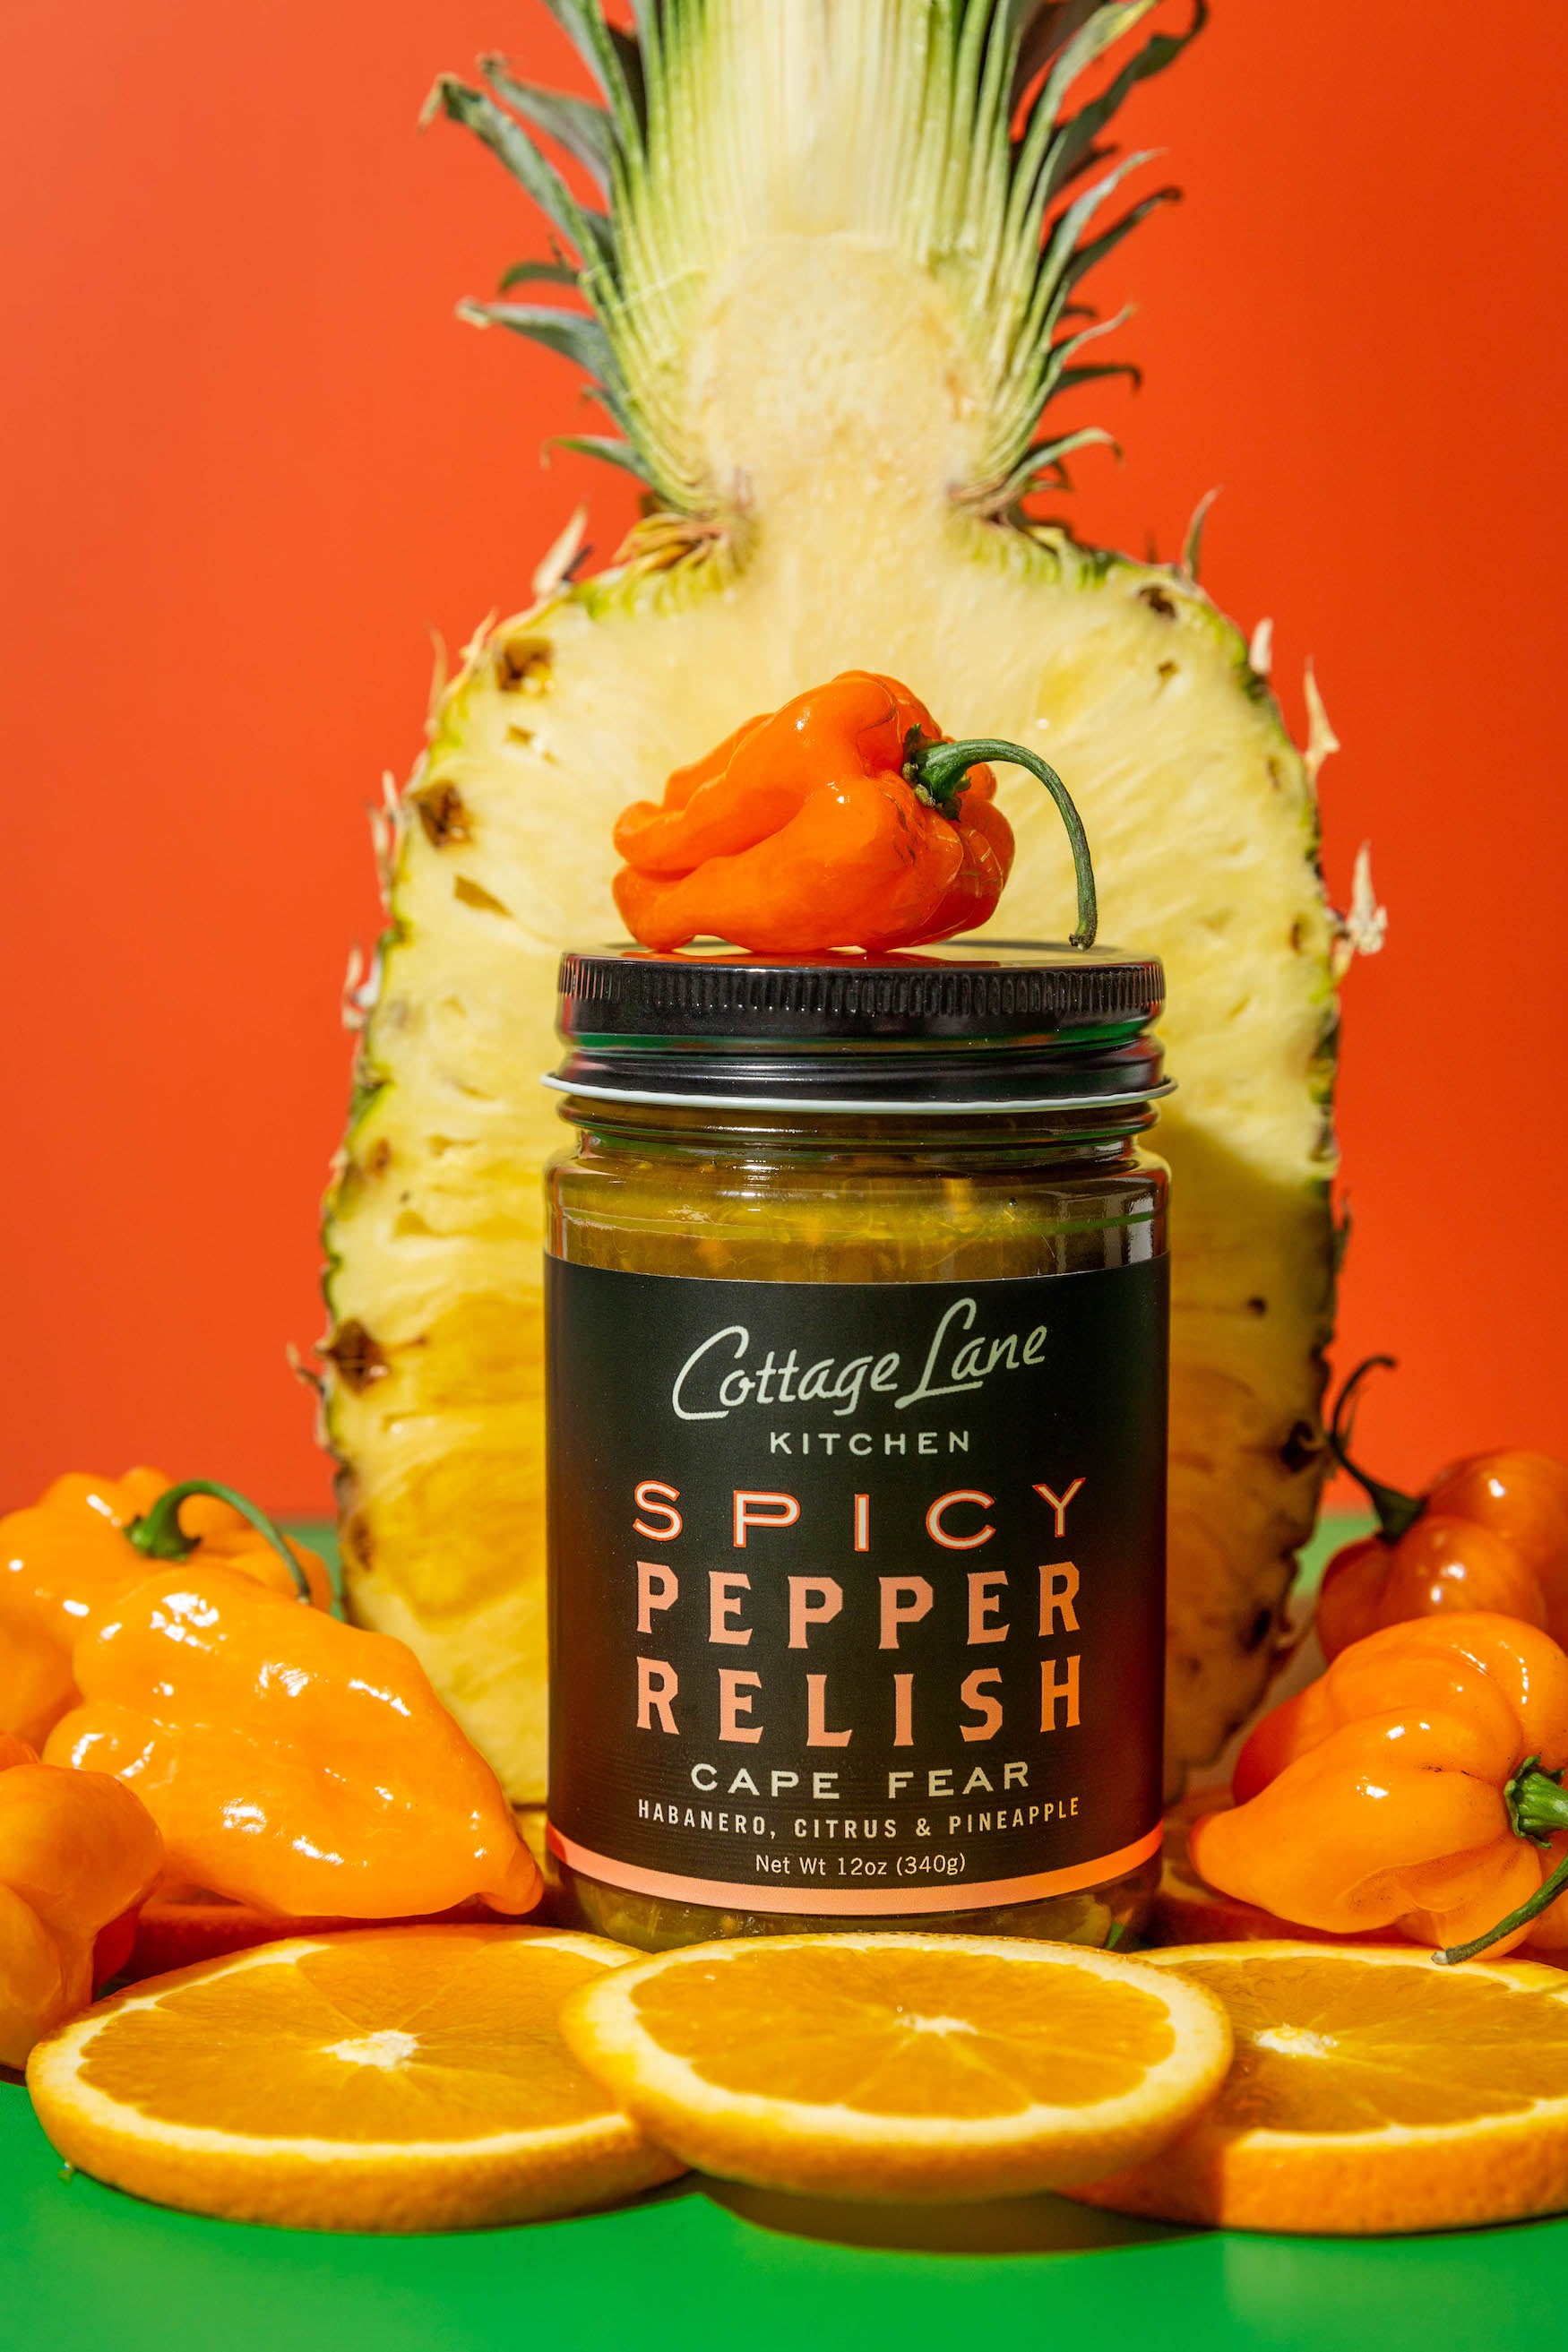 All fresh ingredients in Cape Fear Spicy Pepper relishes